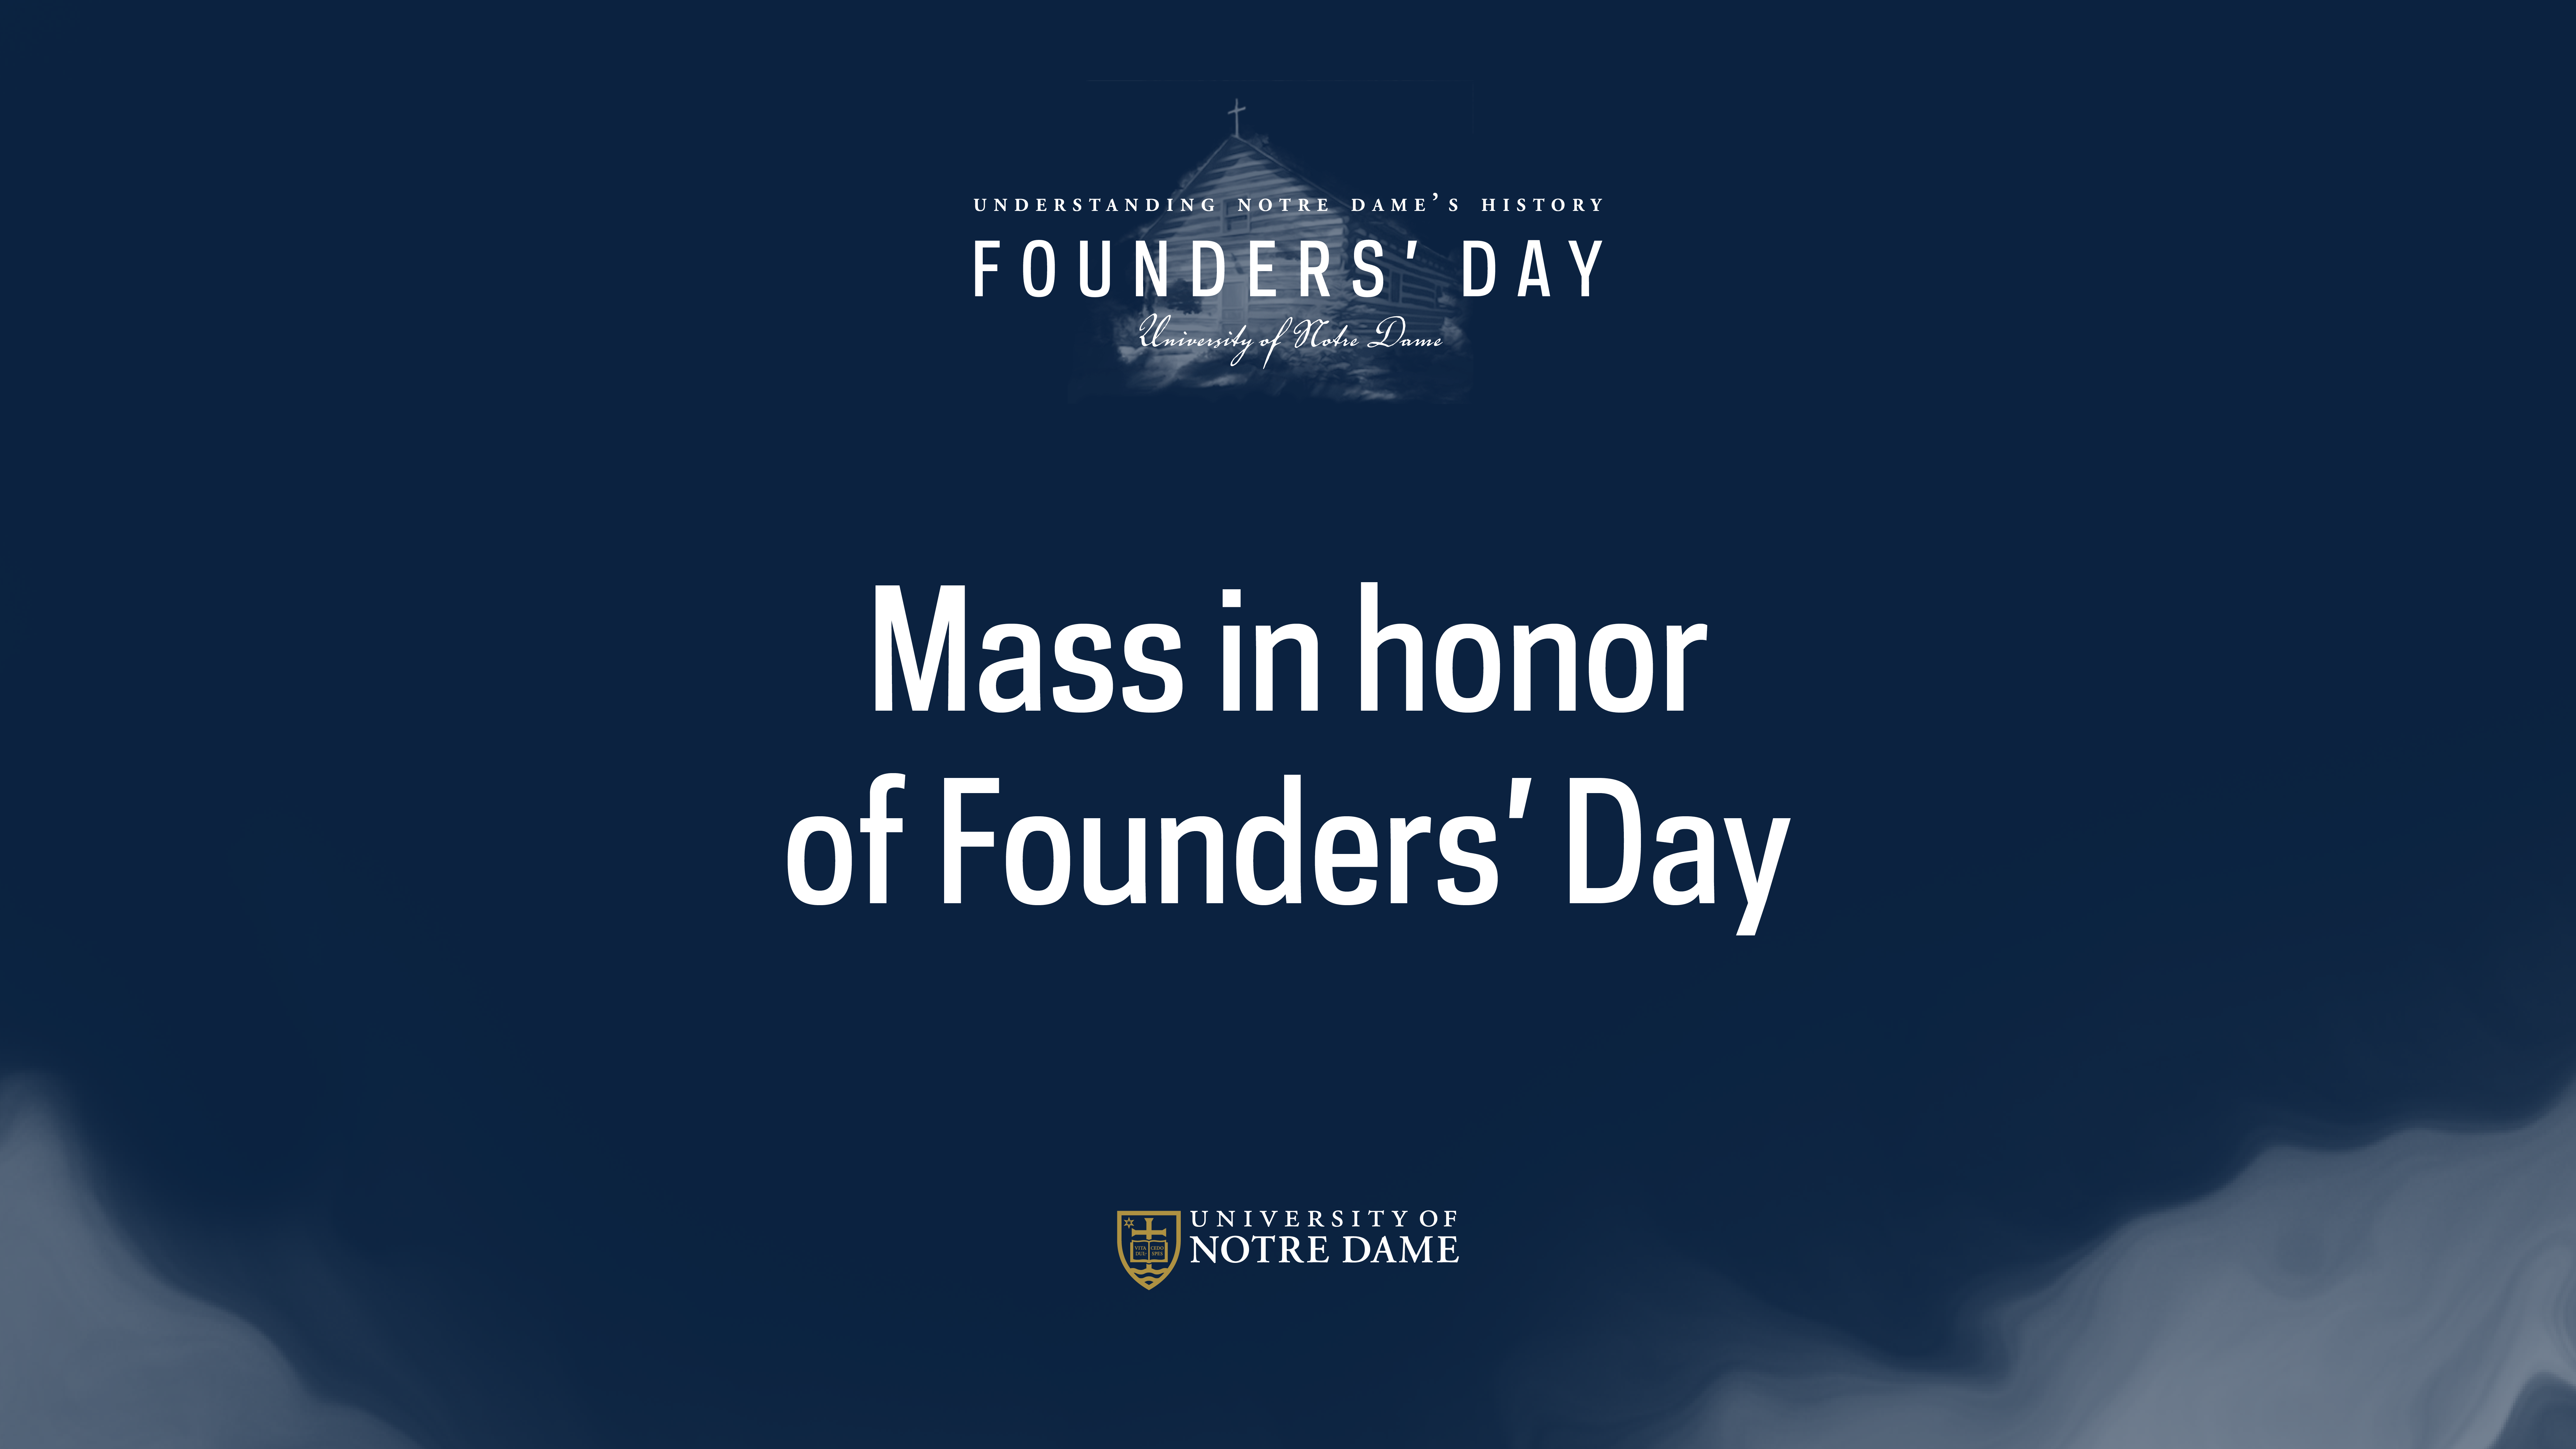 Mass in honor of Founders’ Day